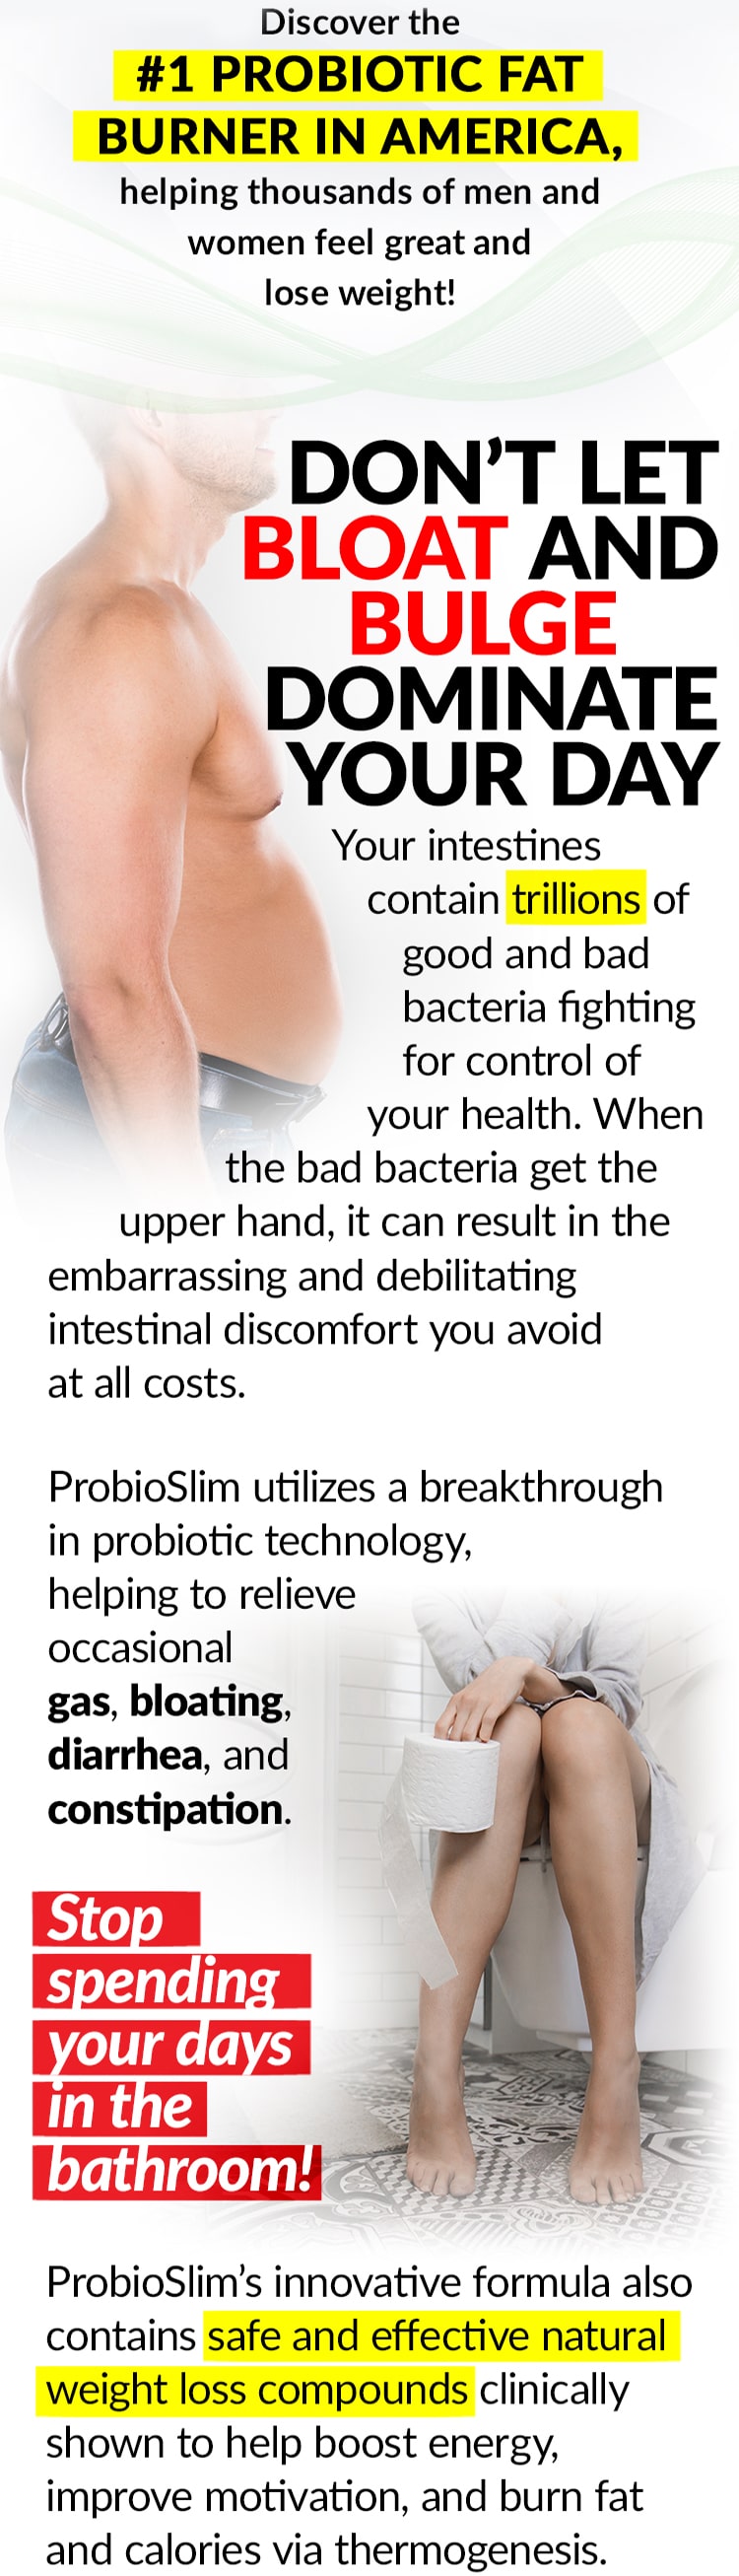 Discover the #1 PROBIOTIC FAT BURNER IN AMERICA, helping thousands of men and women feel great and lose weight! DON’T LET BLOAT AND BULGE DOMINATE YOUR DAY Your intestines contain trillions of good and bad bacteria fighting for control of your health. When the bad bacteria get the upper hand, it can result in the embarrassing and debilitating intestinal discomfort you avoid at all costs. ProbioSlim utilizes a breakthrough in probiotic technology, helping to relieve occasional gas, bloating, diarrhea, and constipation. Stop spending your days in the bathroom! ProbioSlim’s innovative formula also contains safe and effective natural weight loss compounds clinically shown to help boost energy, improve motivation, and burn fat and calories via thermogenesis.